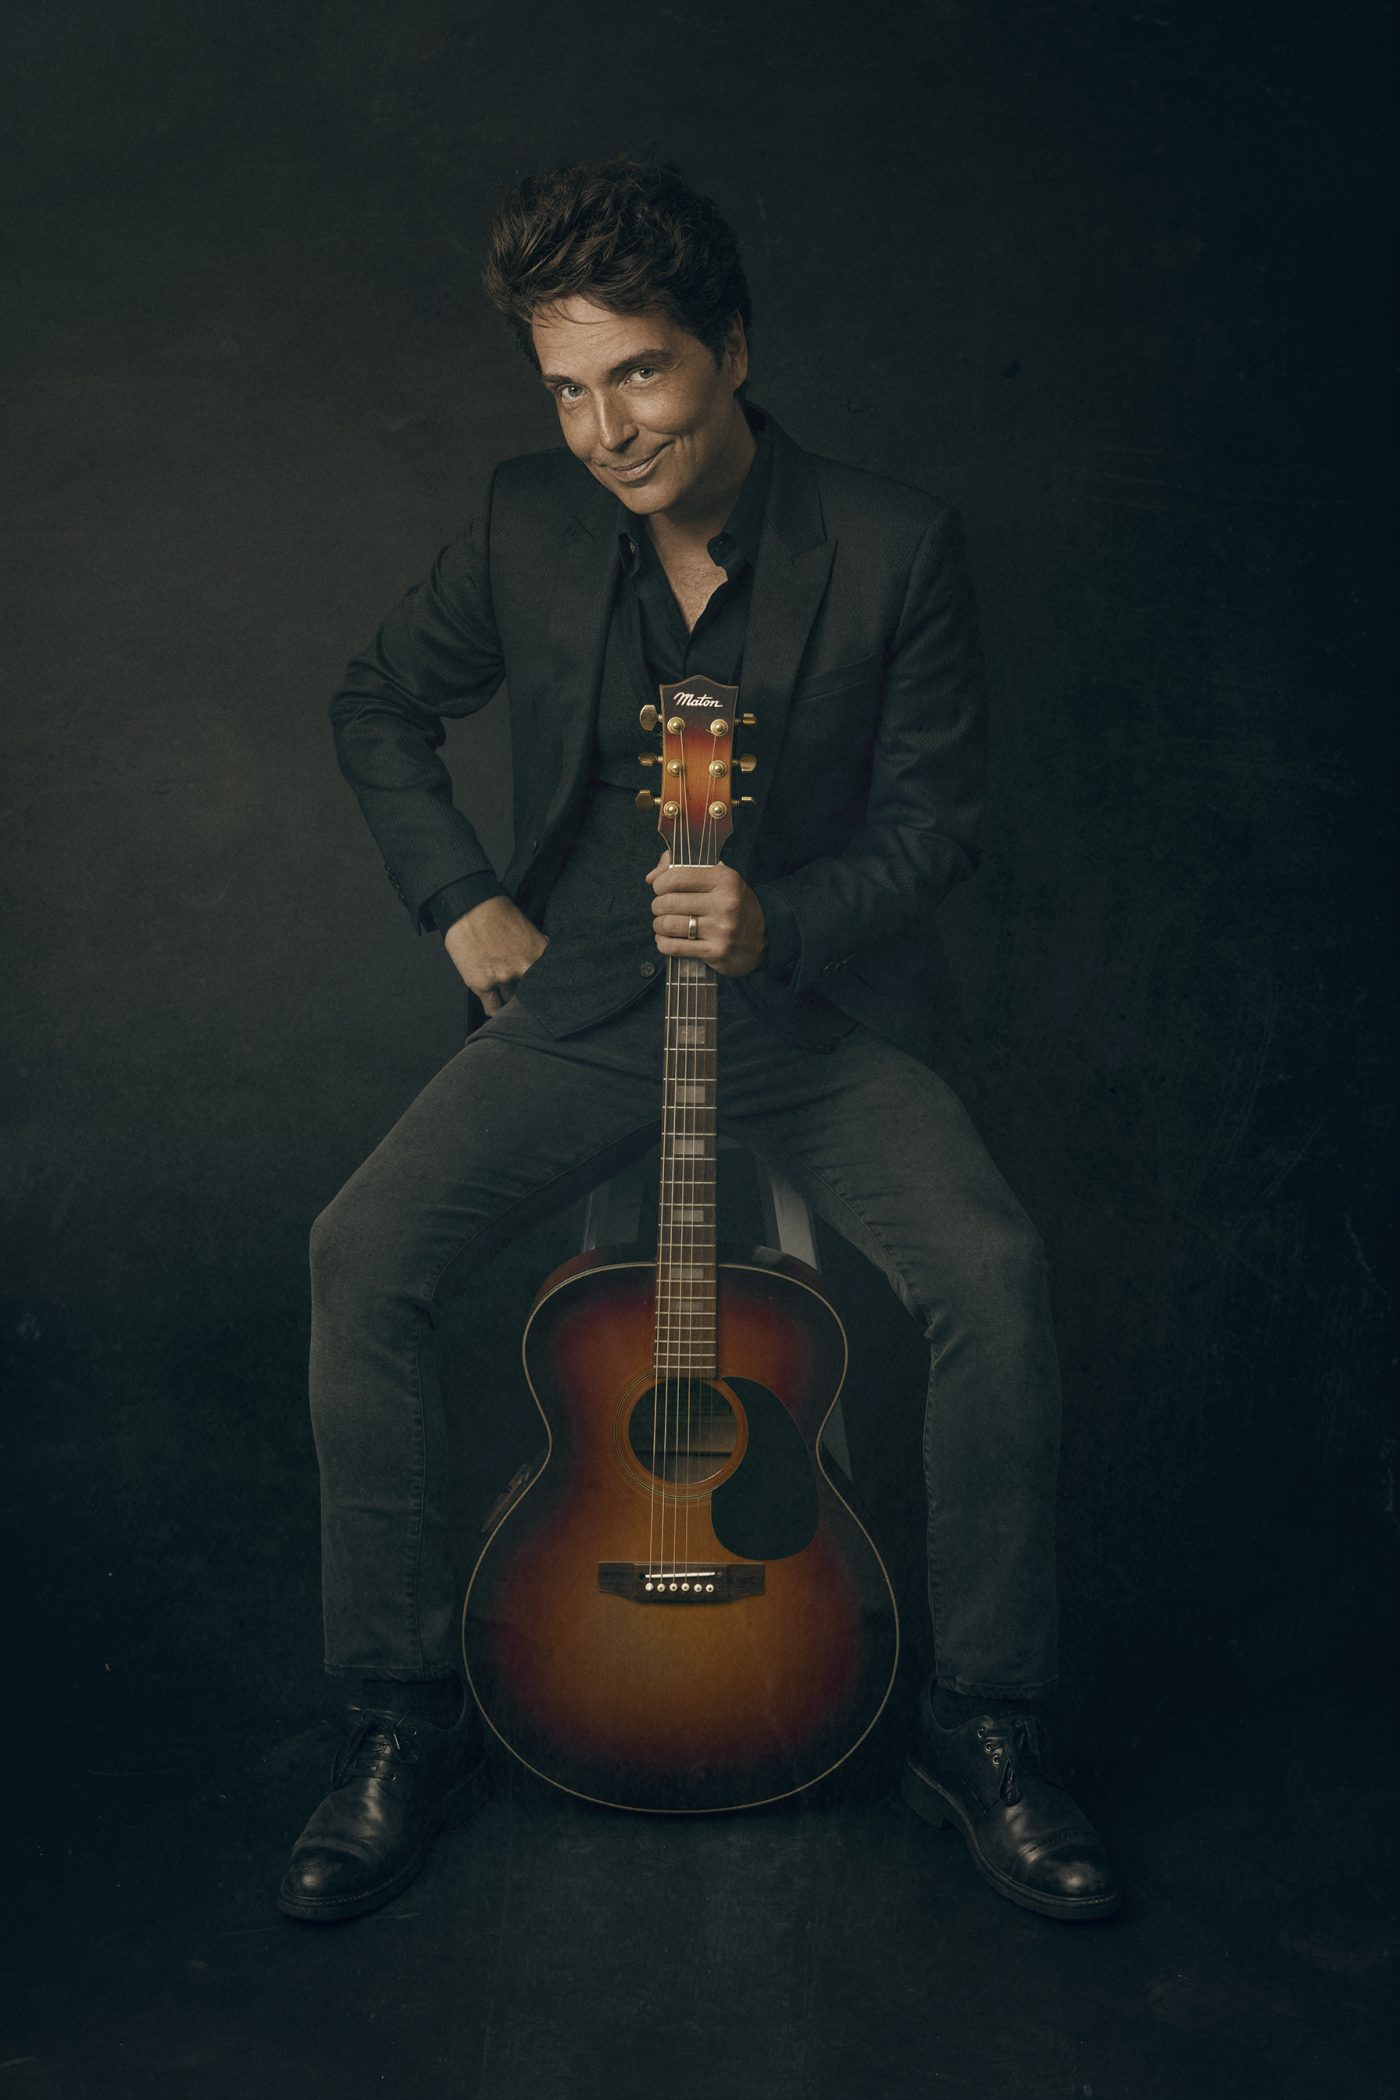 BACK ON TOUR! All New Dates Announced For '22 Richard Marx